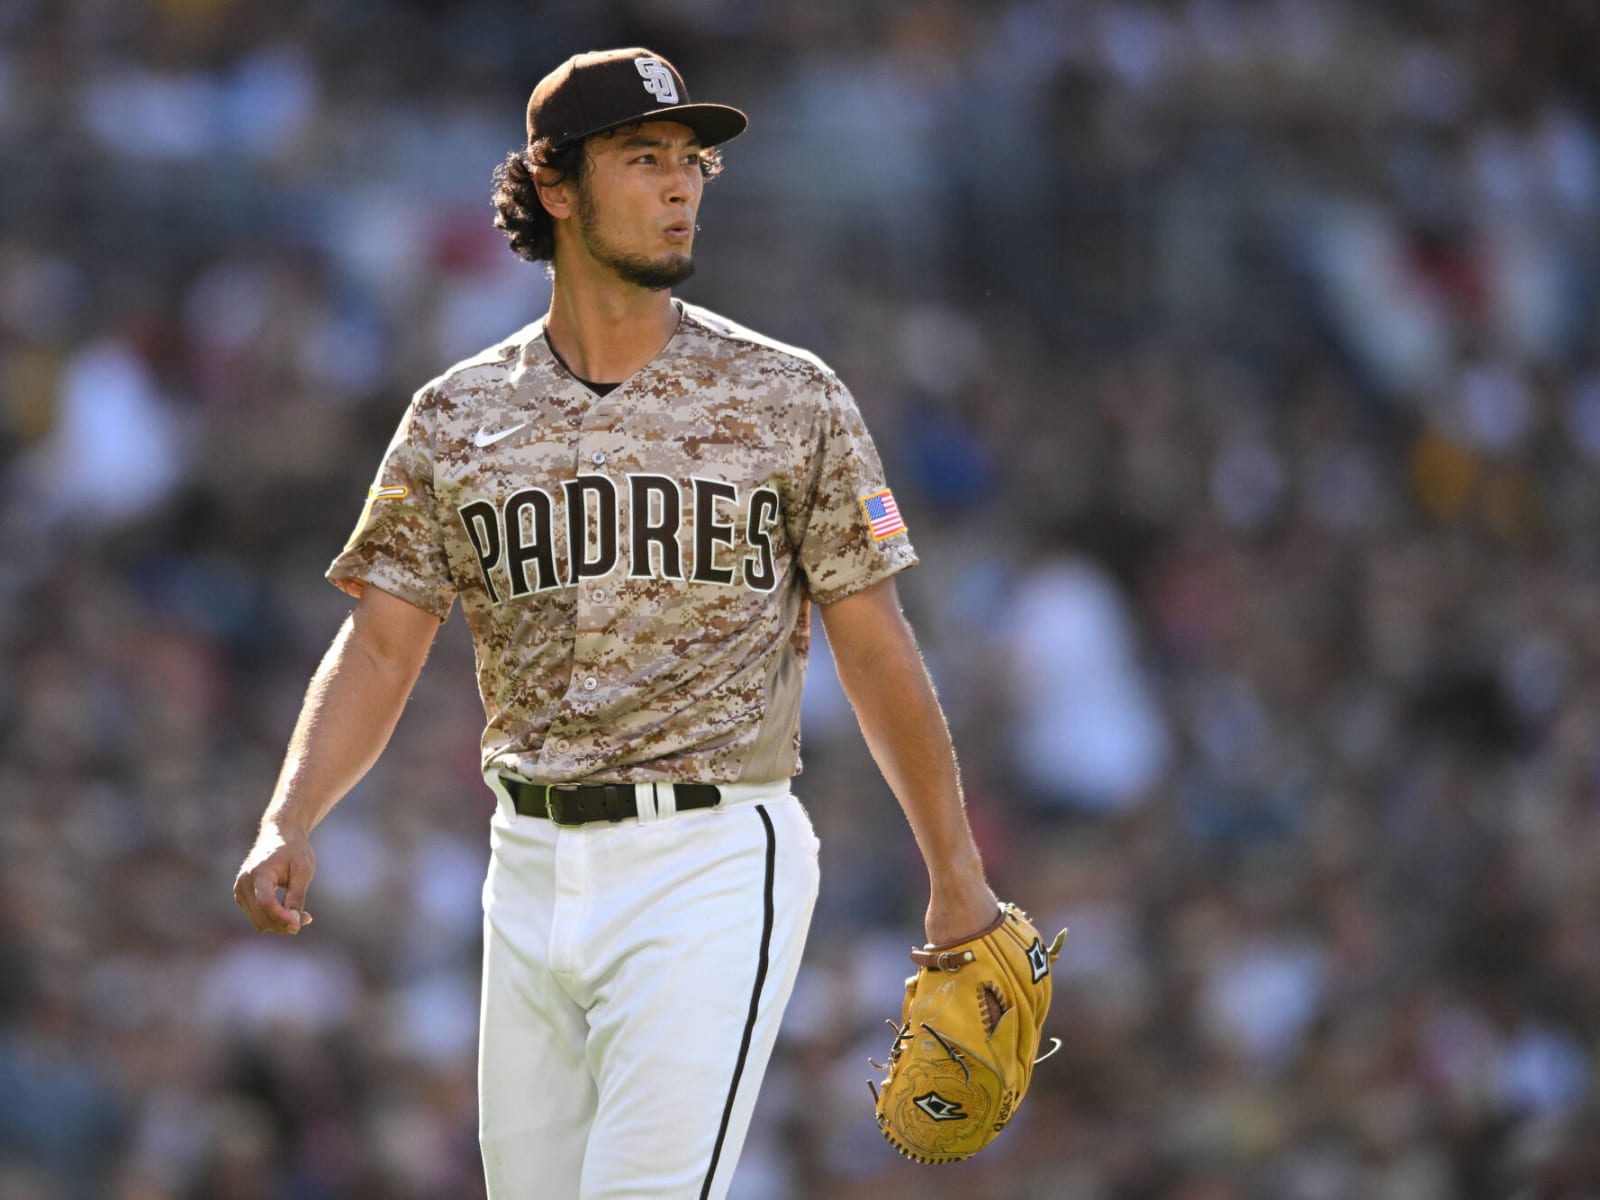 Padres' Darvish becomes all-time strikeout leader for Japanese pitchers -  Gaslamp Ball